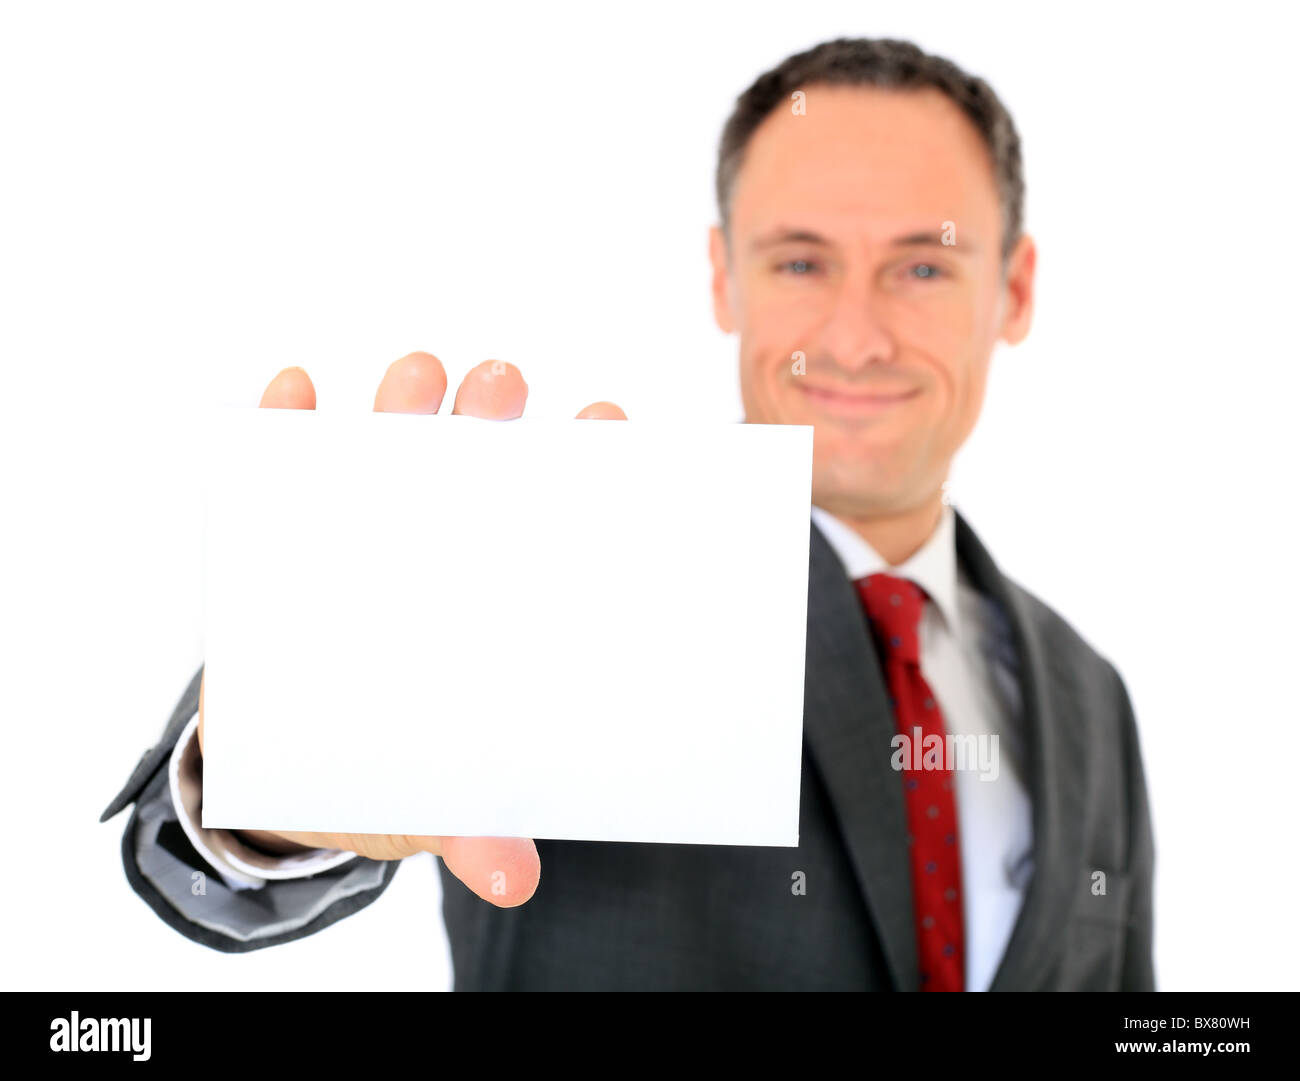 Attractive businessman holding blank white card. Focus on card in foreground. All on white background. Stock Photo